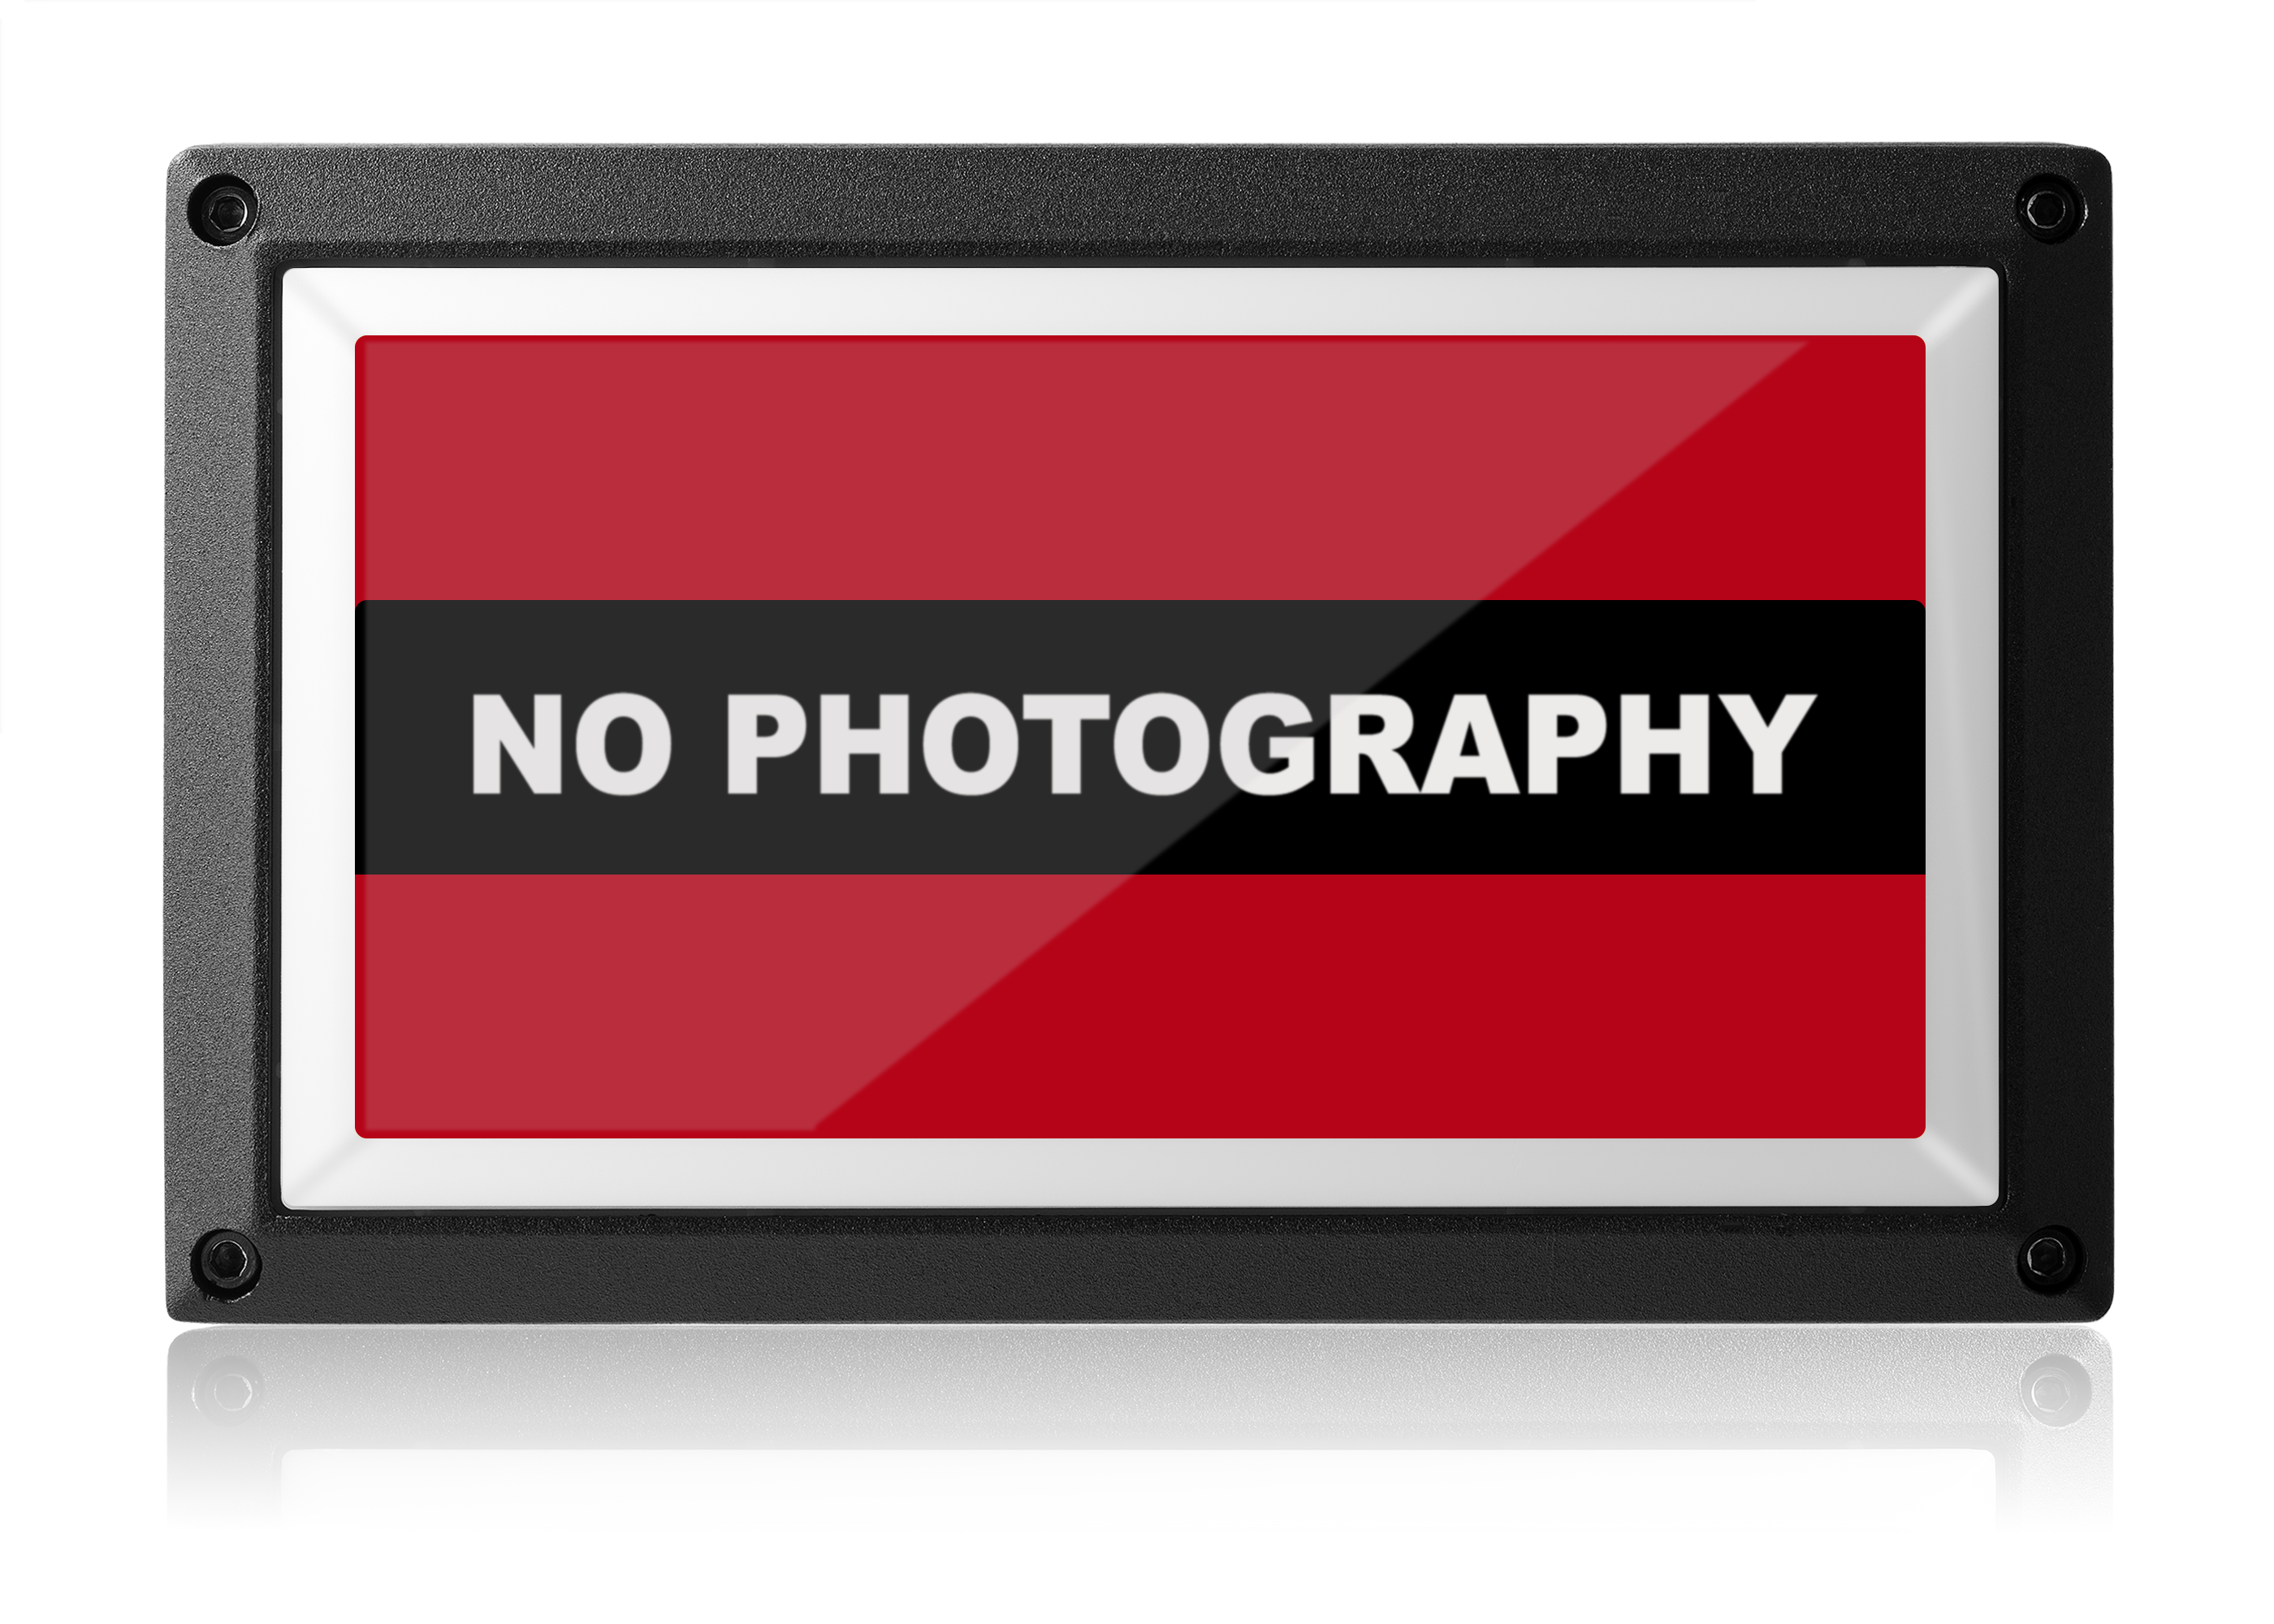 No Photography Light - Red ISO - Rekall Dynamics LED Sign